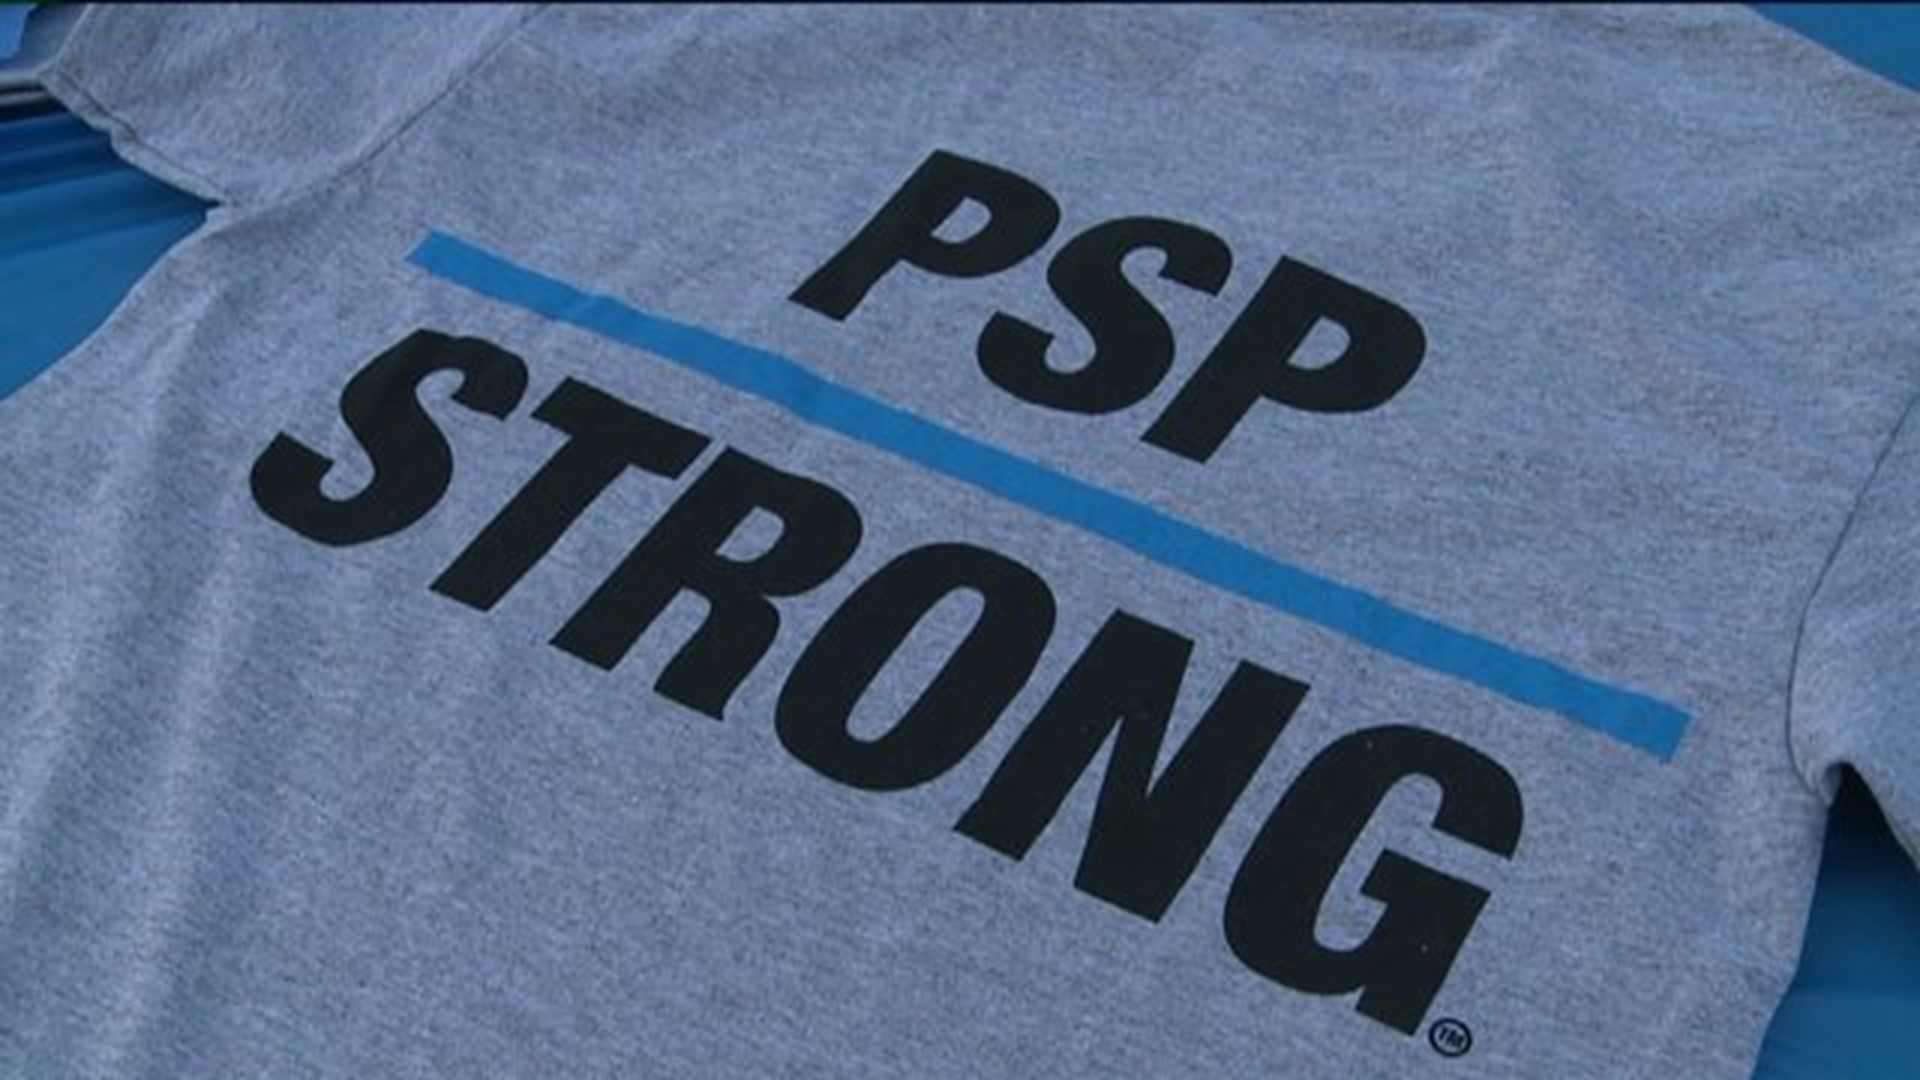 More 'PSP Strong' Shirts Sold to Benefit Troopers' Families